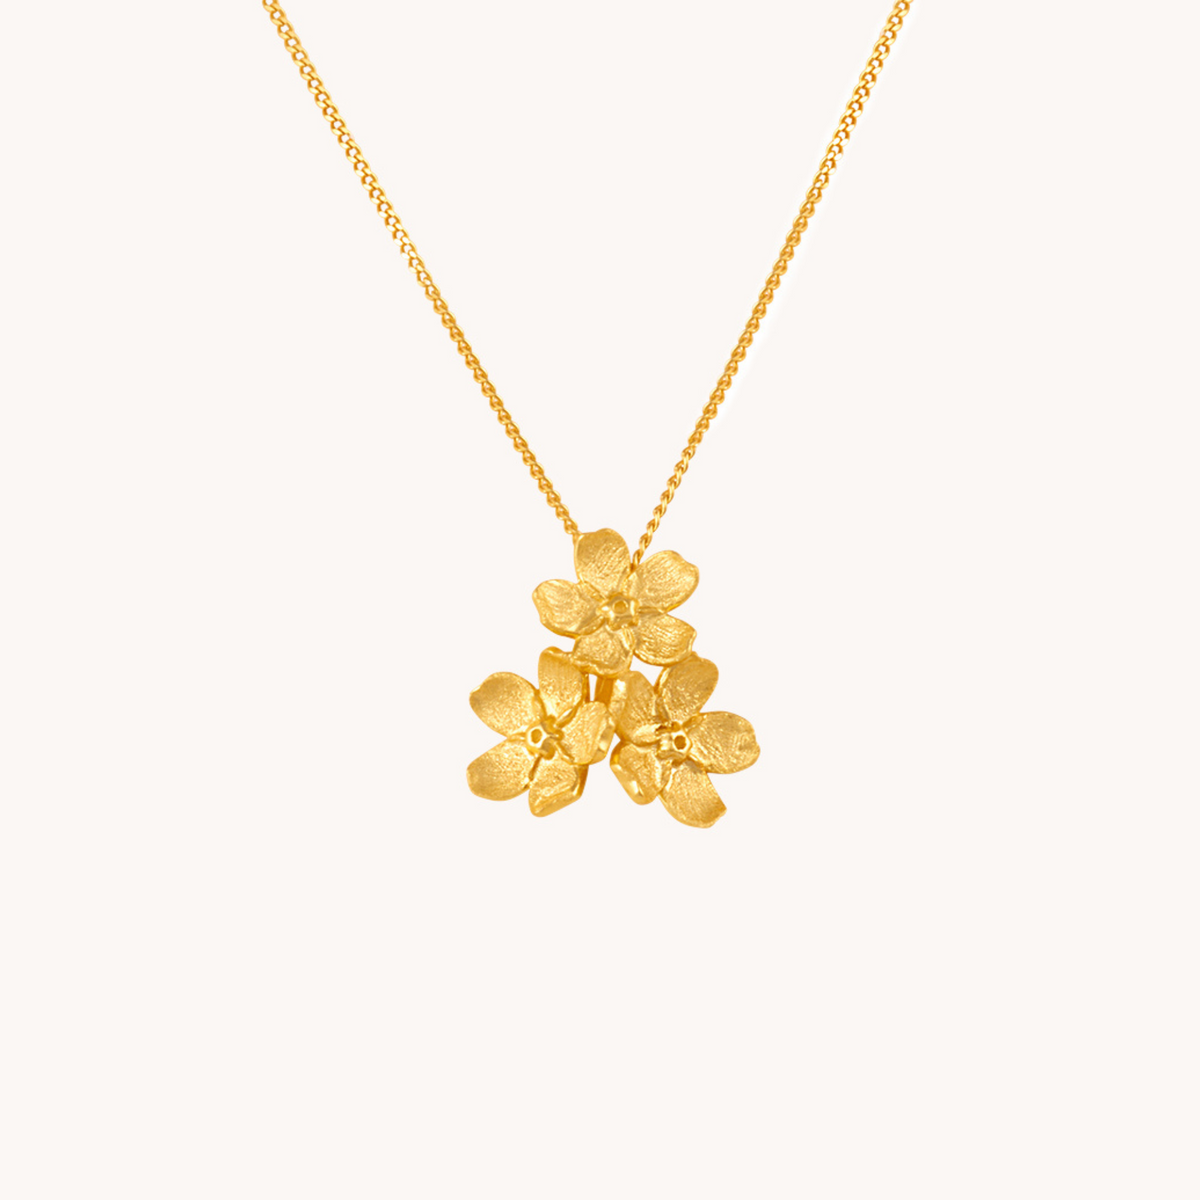 Cherry Blossom Bunch Gold Pendant With Chain